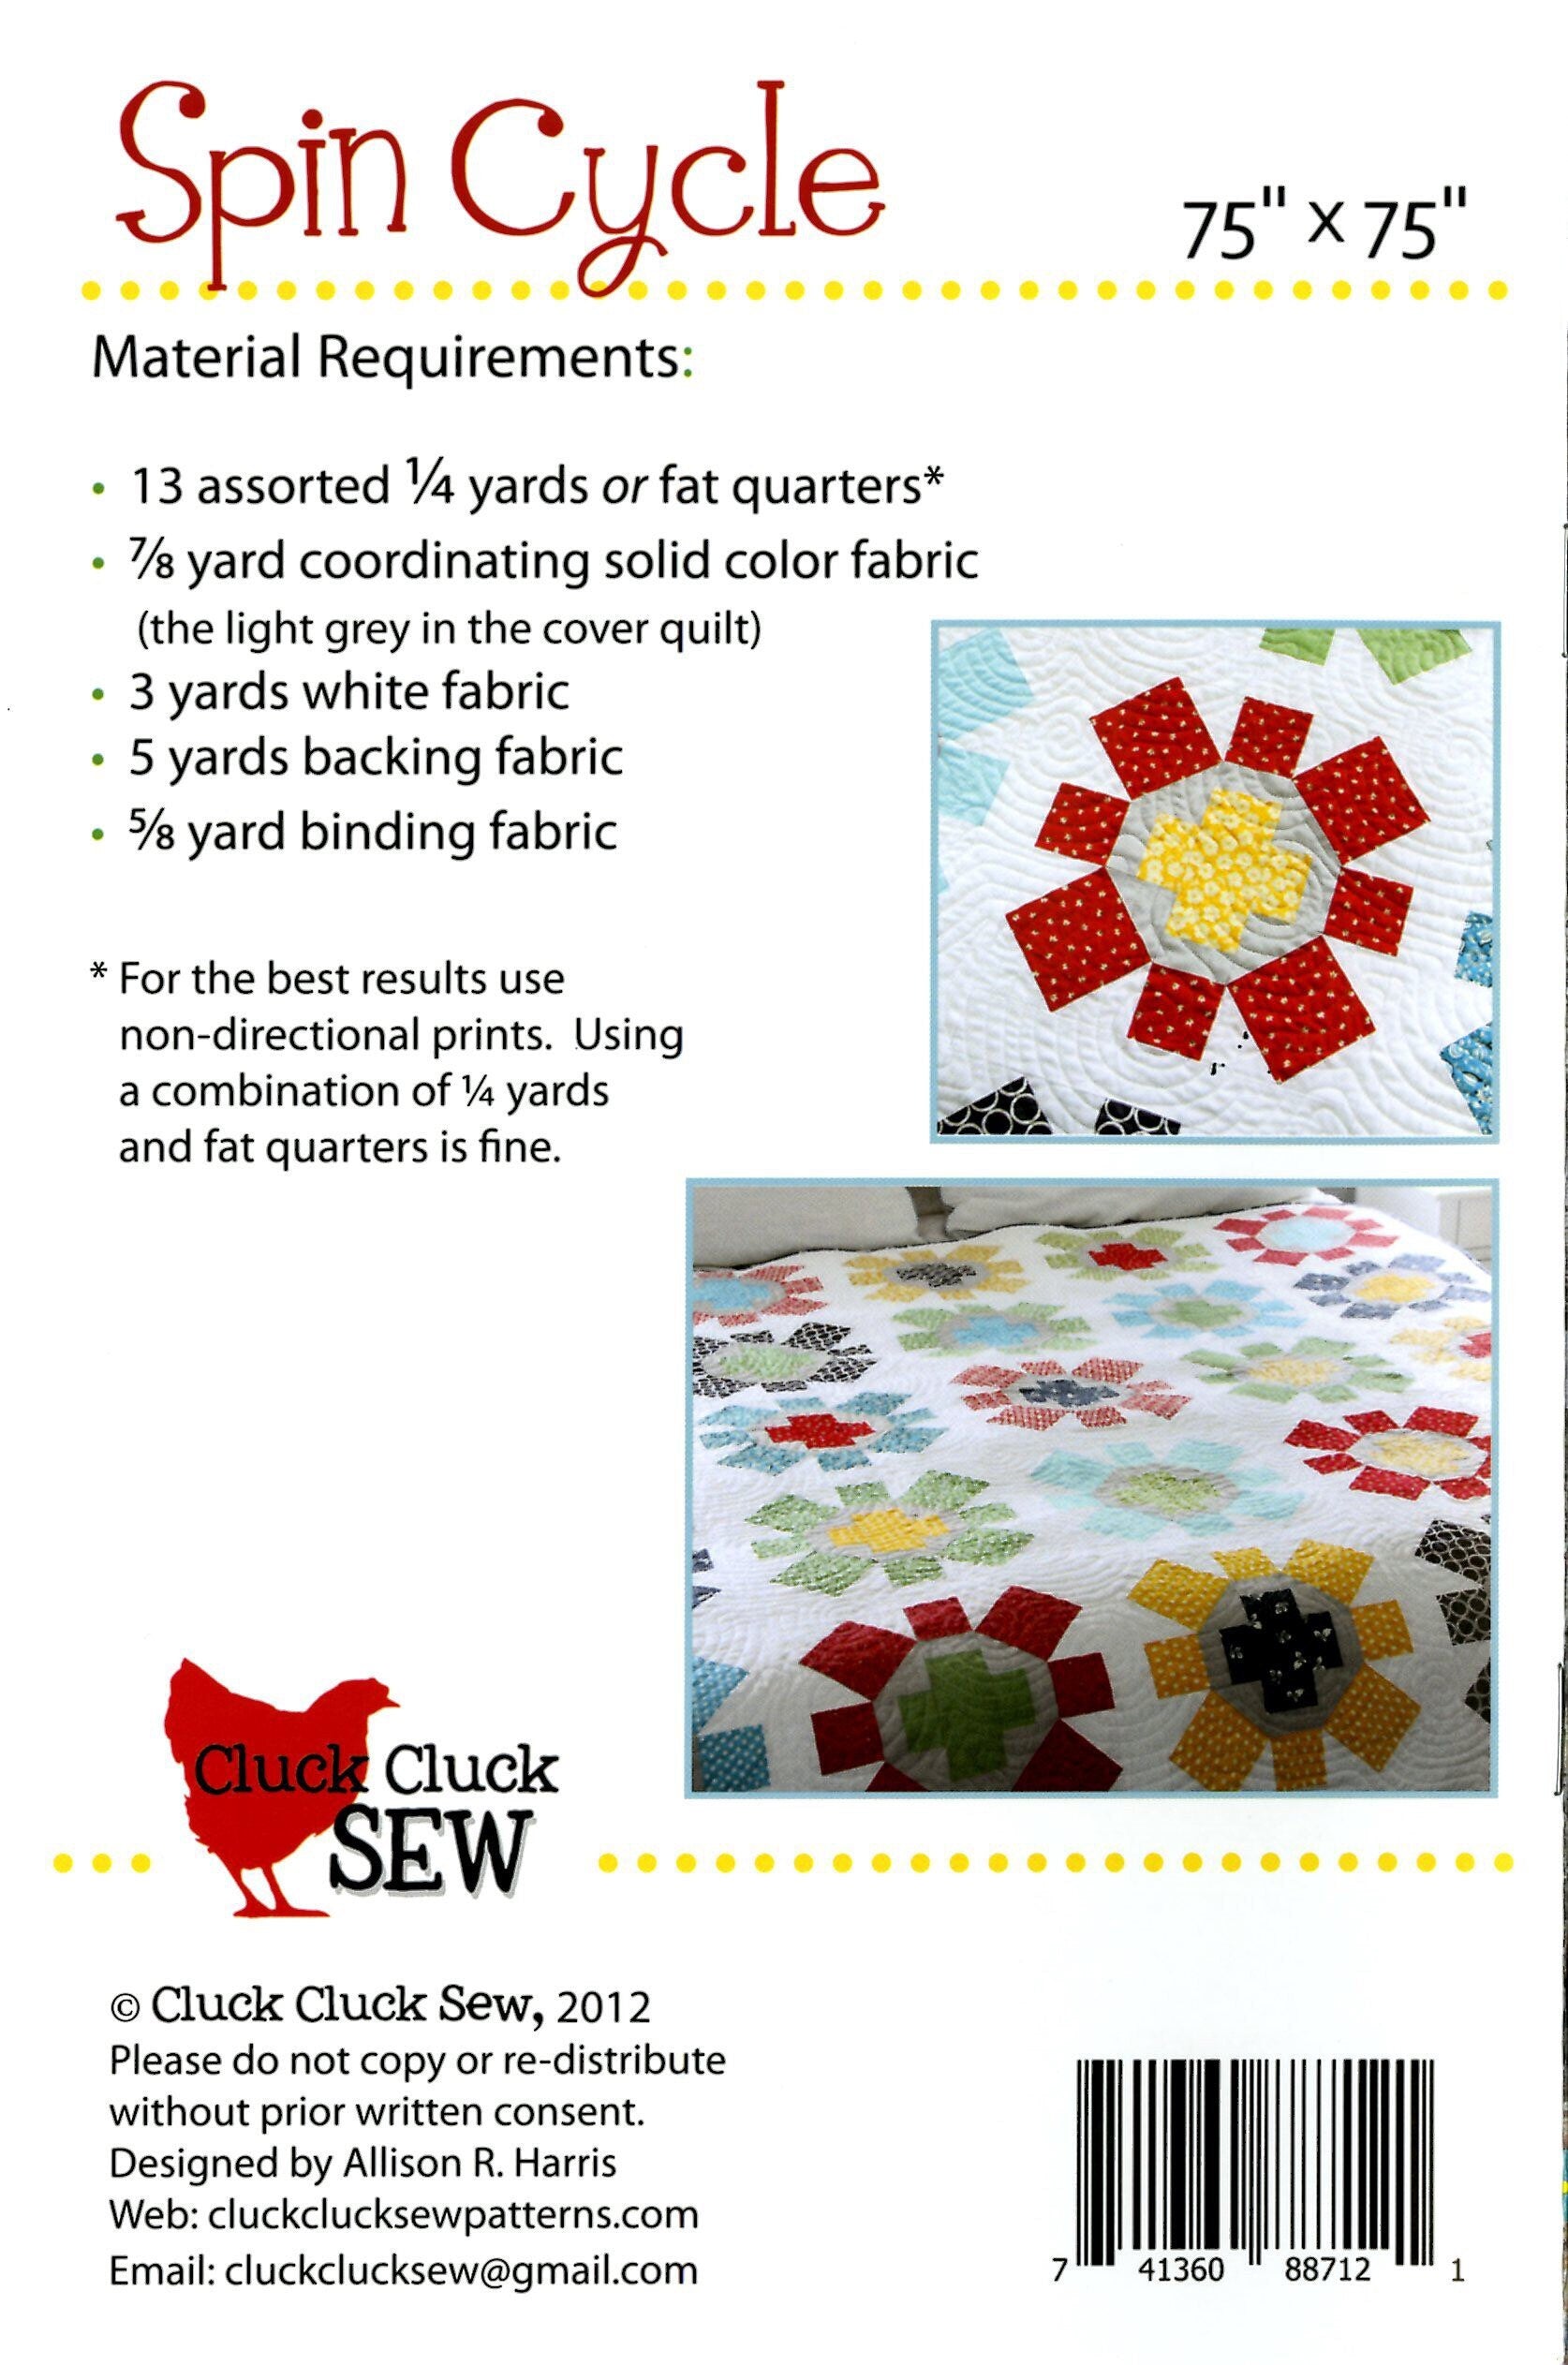 Spin Cycle Quilt Pattern - Cluck Cluck Sew - Allison Harris - Fat Quarter Friendly - 75” x 75”